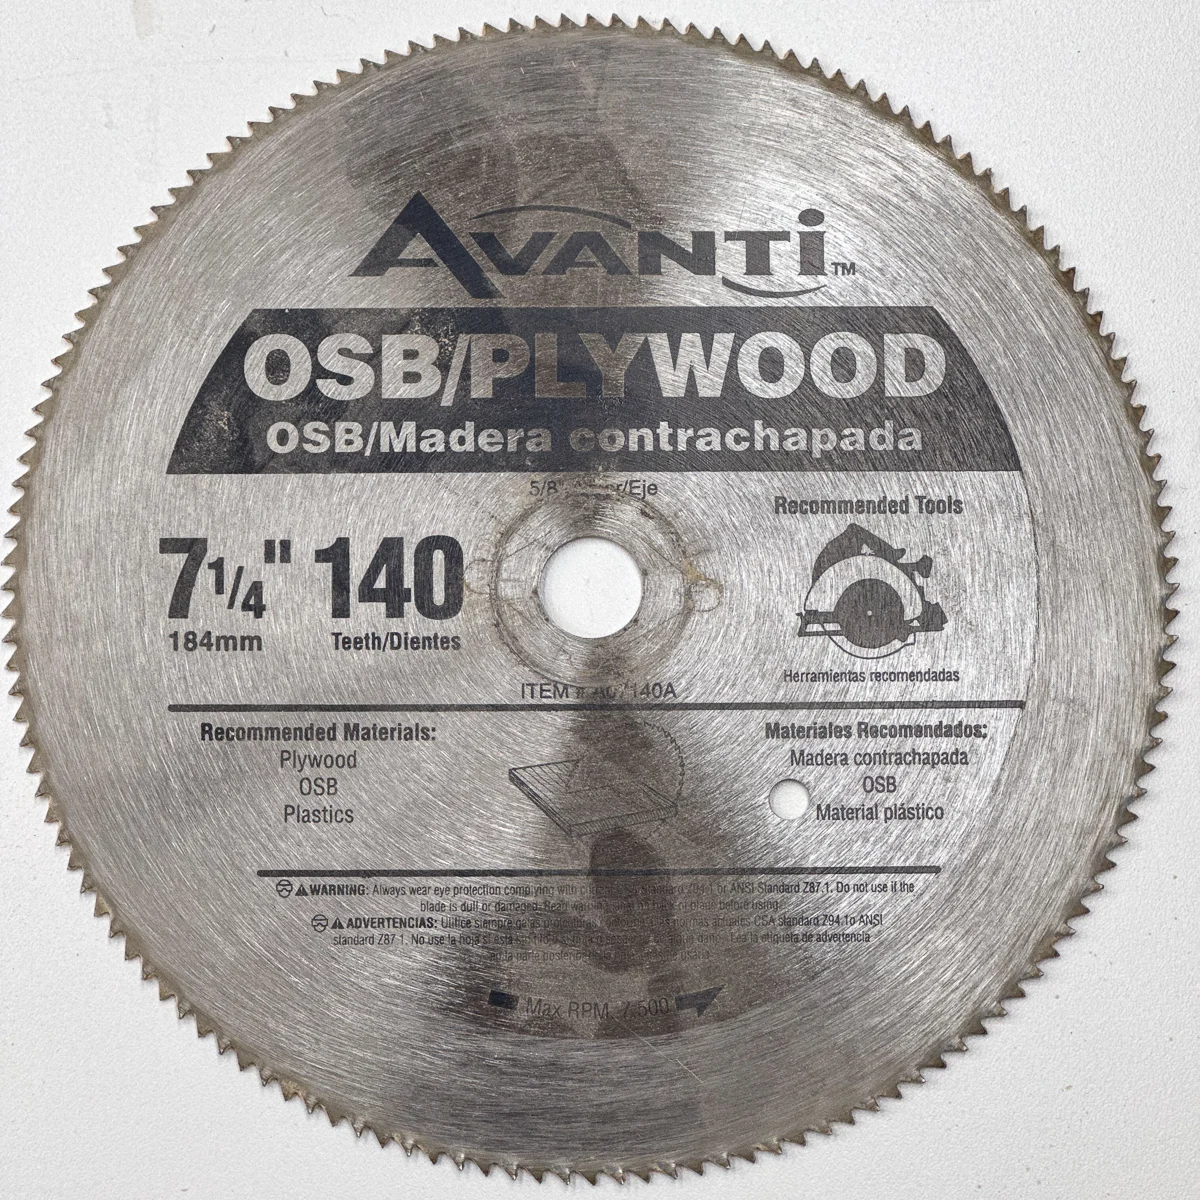 140 tooth count blade for a circular saw